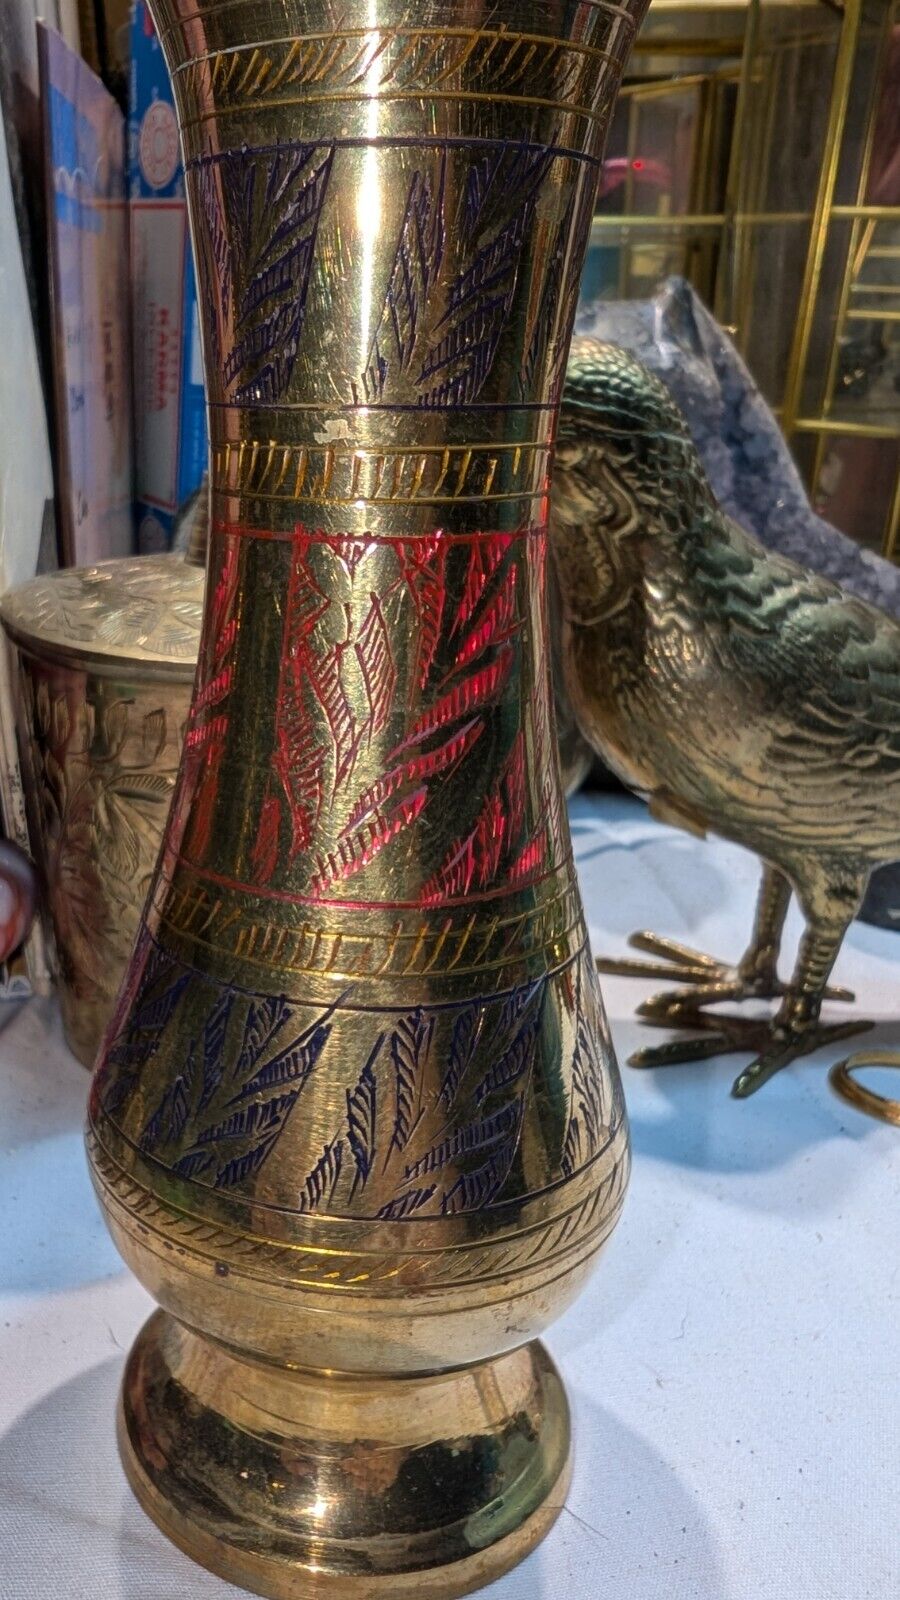 Vintage India Brass Vase Hand Engraved and Painted in Red, Green, Black 6\